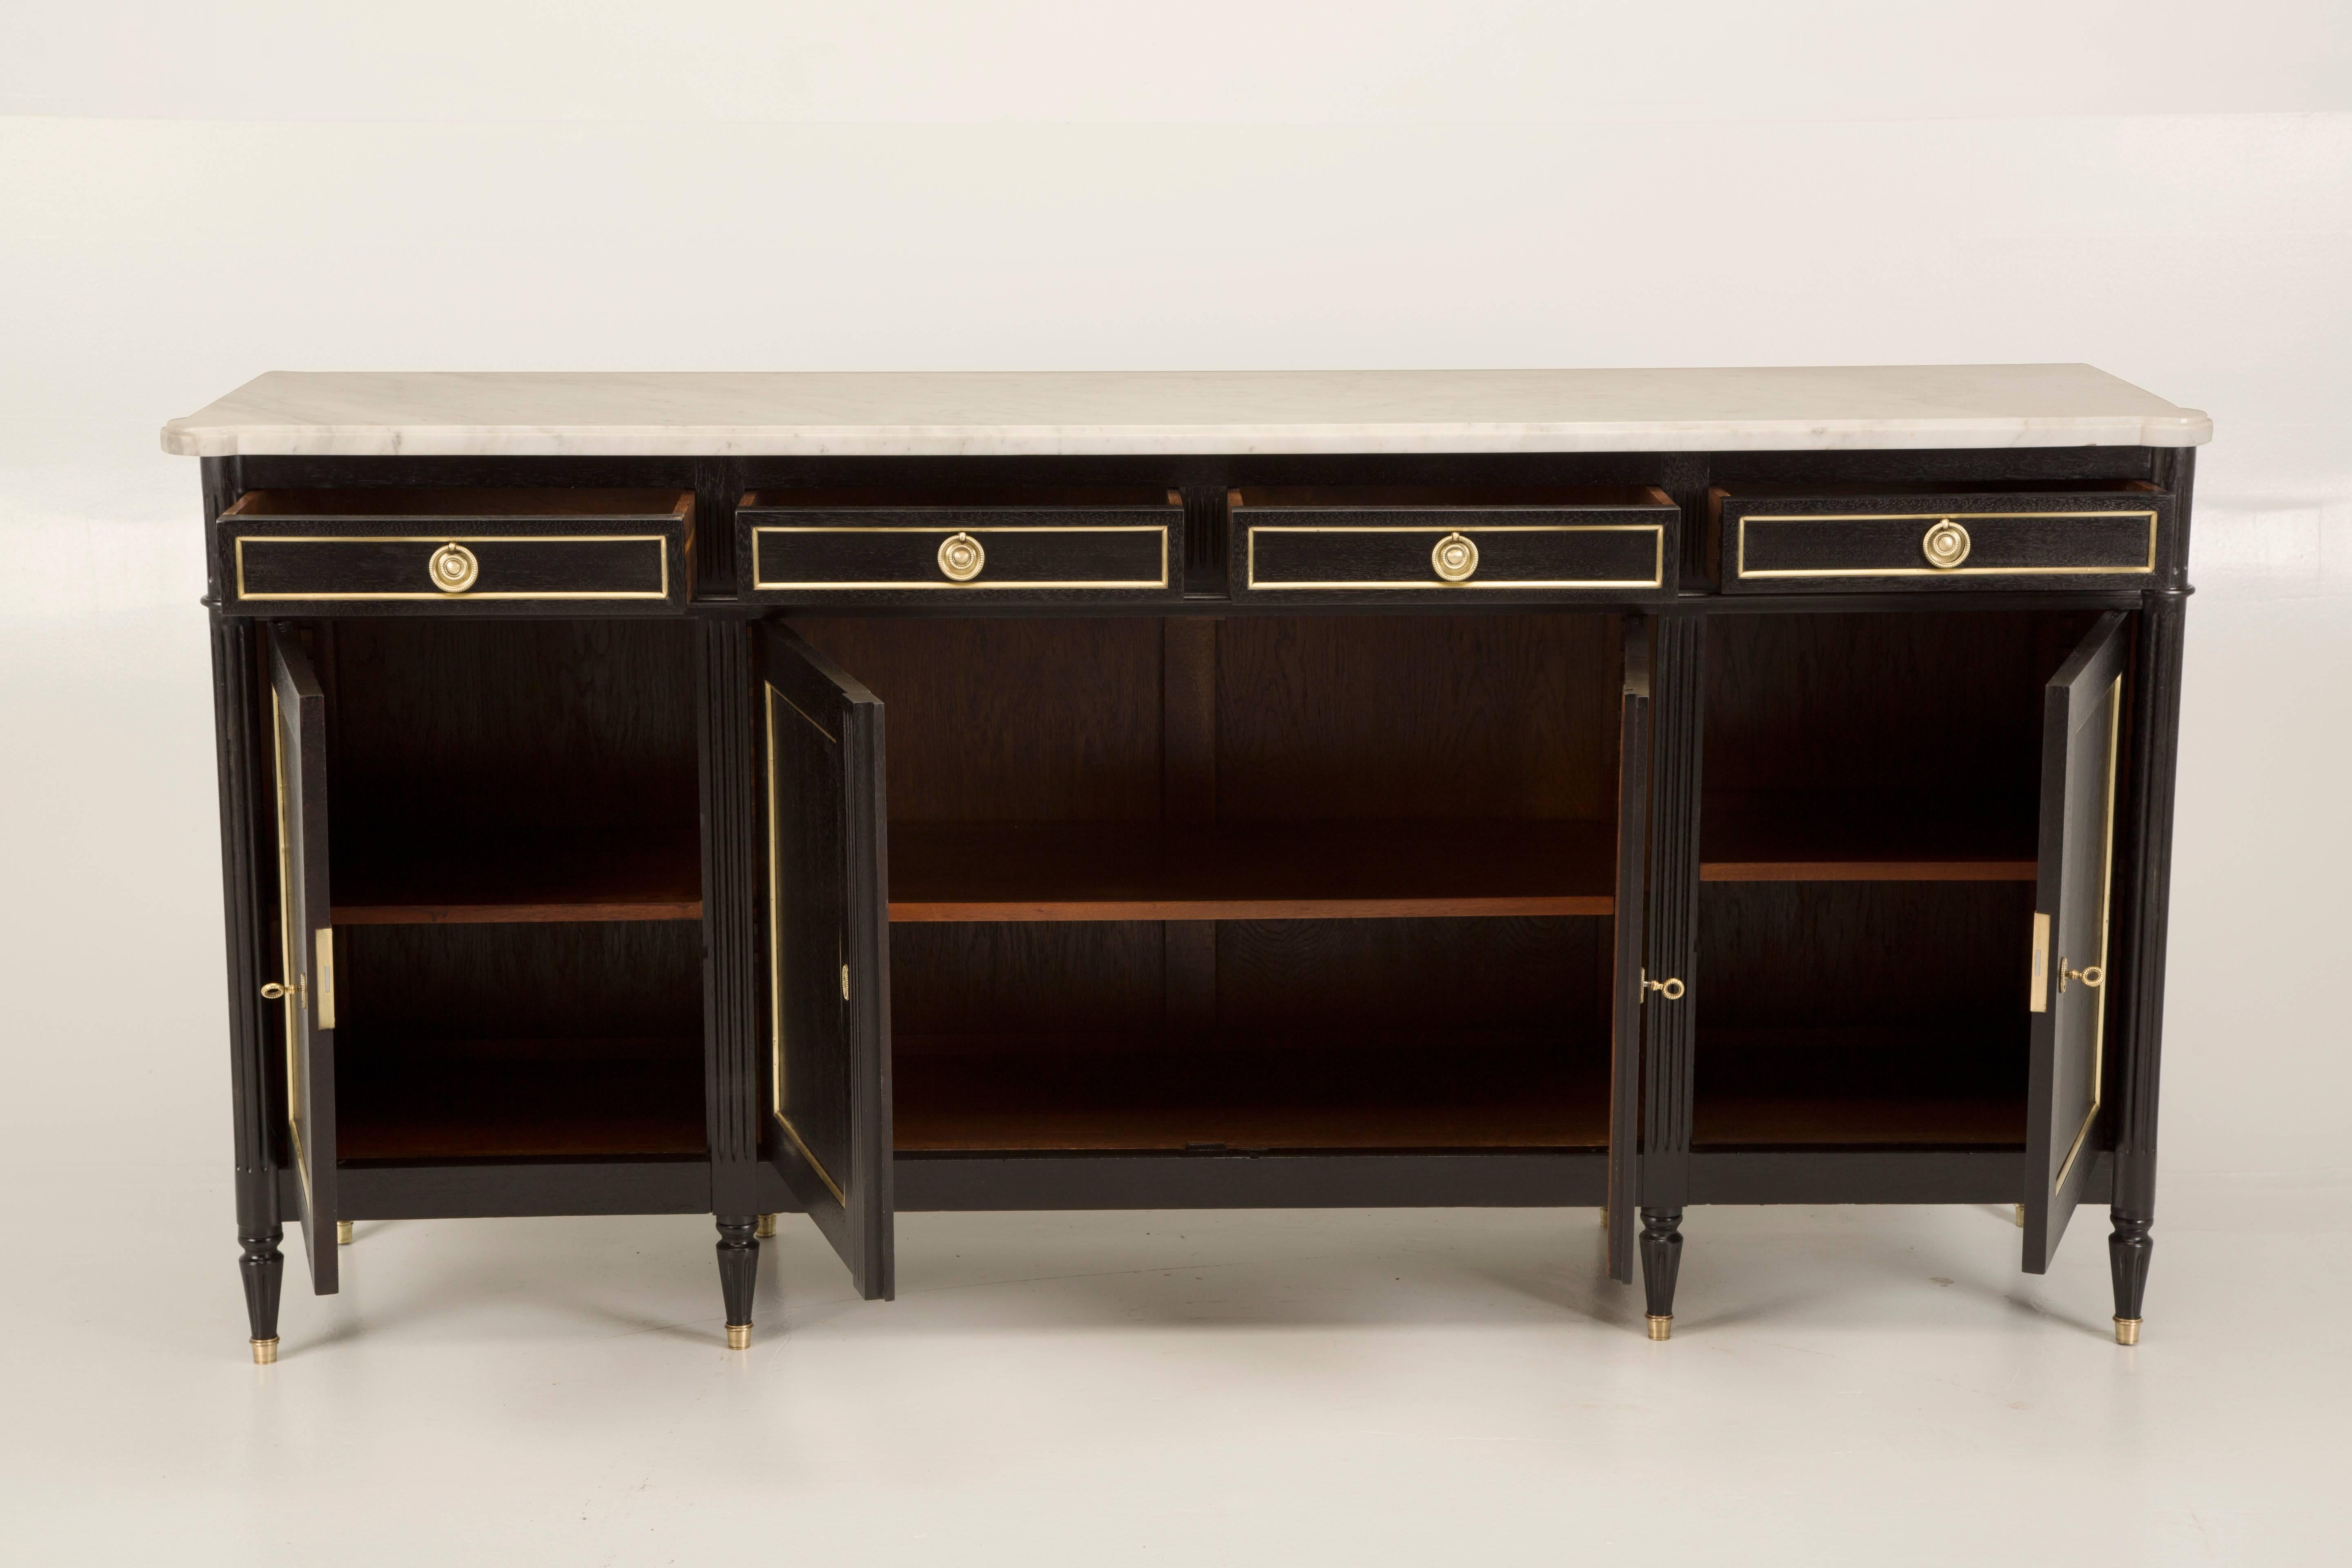 Mahogany French Louis XVI Style Buffet in an Ebonized Finish with a White Marble Top